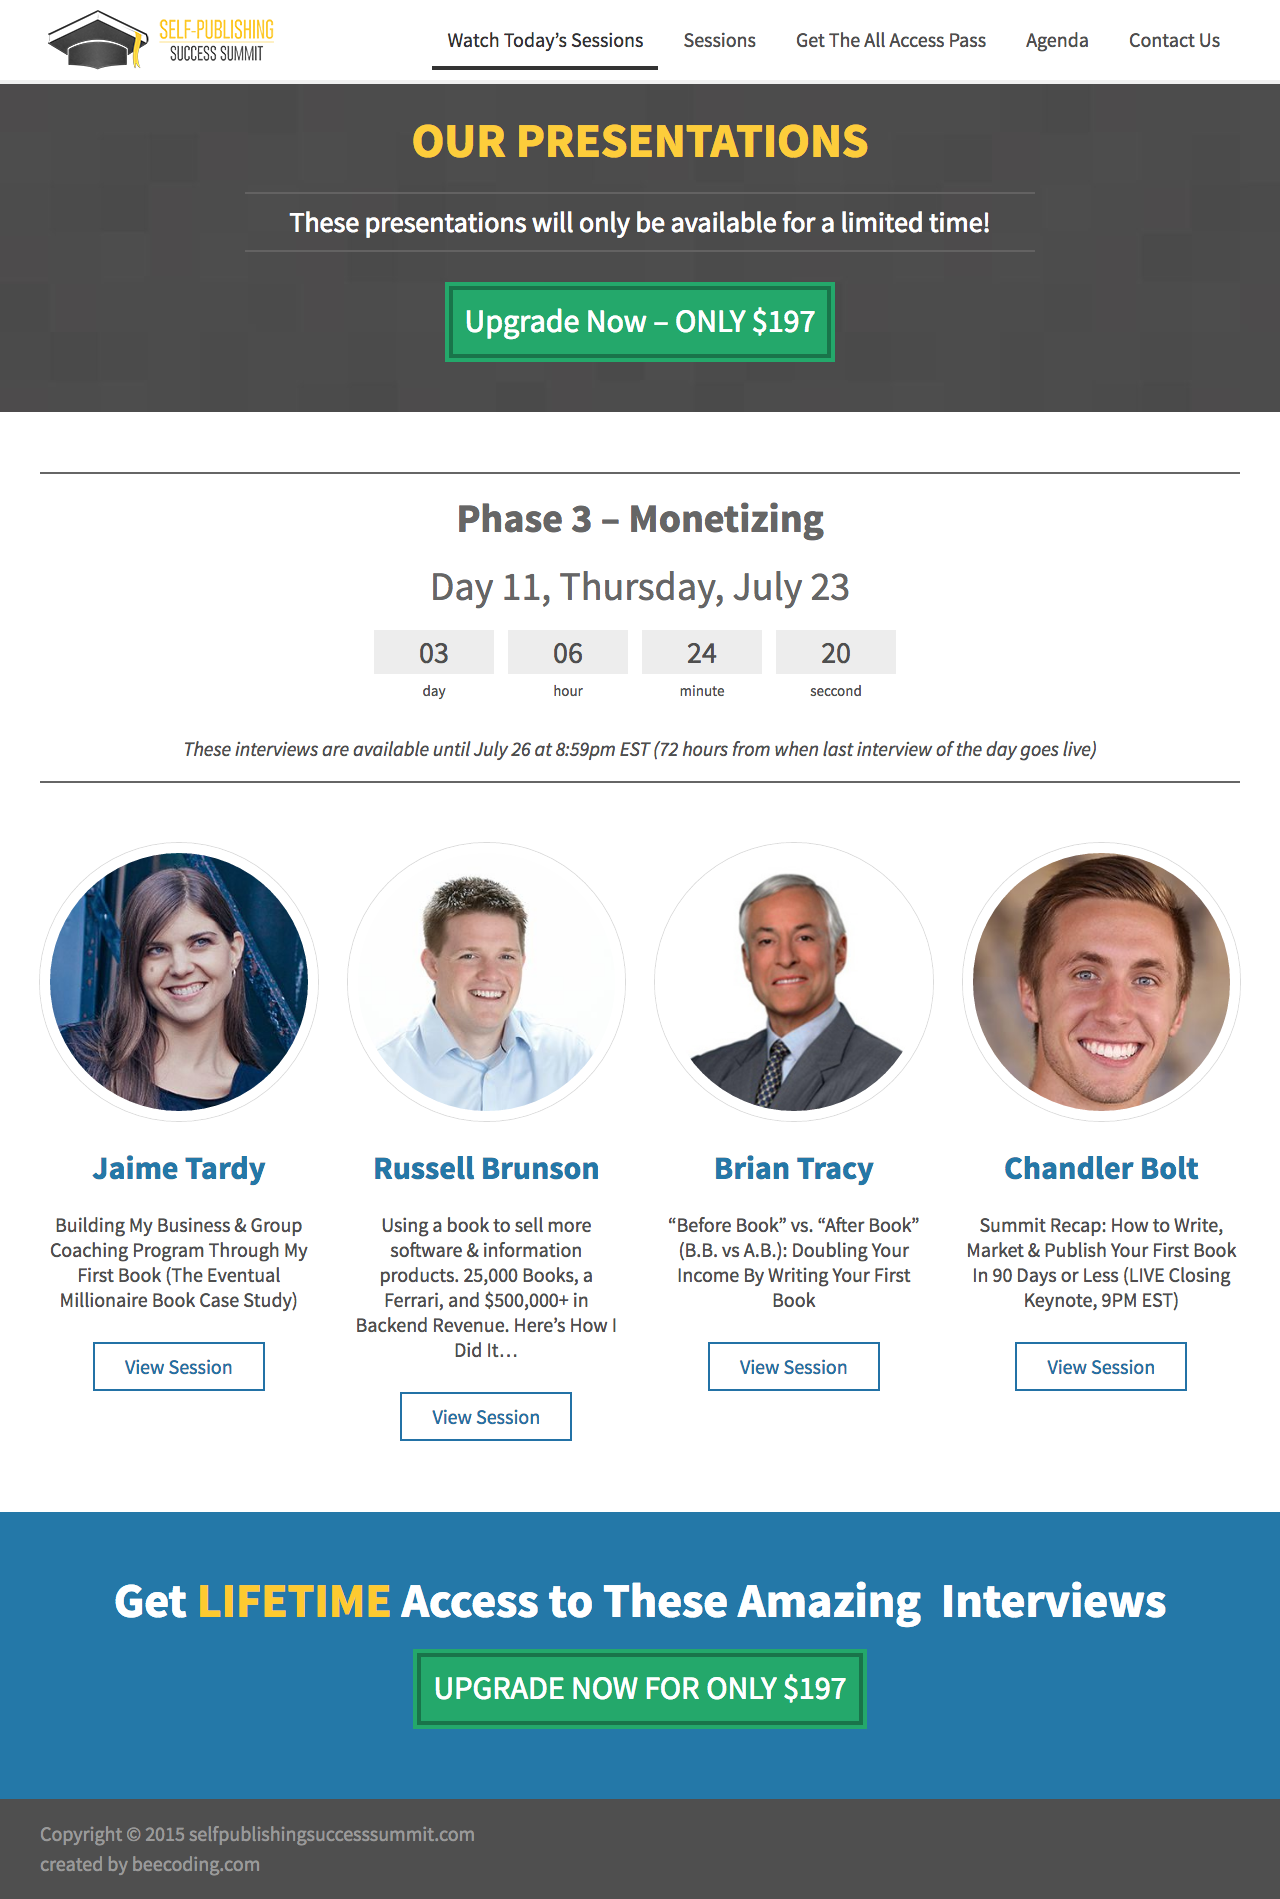 This Virtual Summit Checklist = 25,000 email subscribers